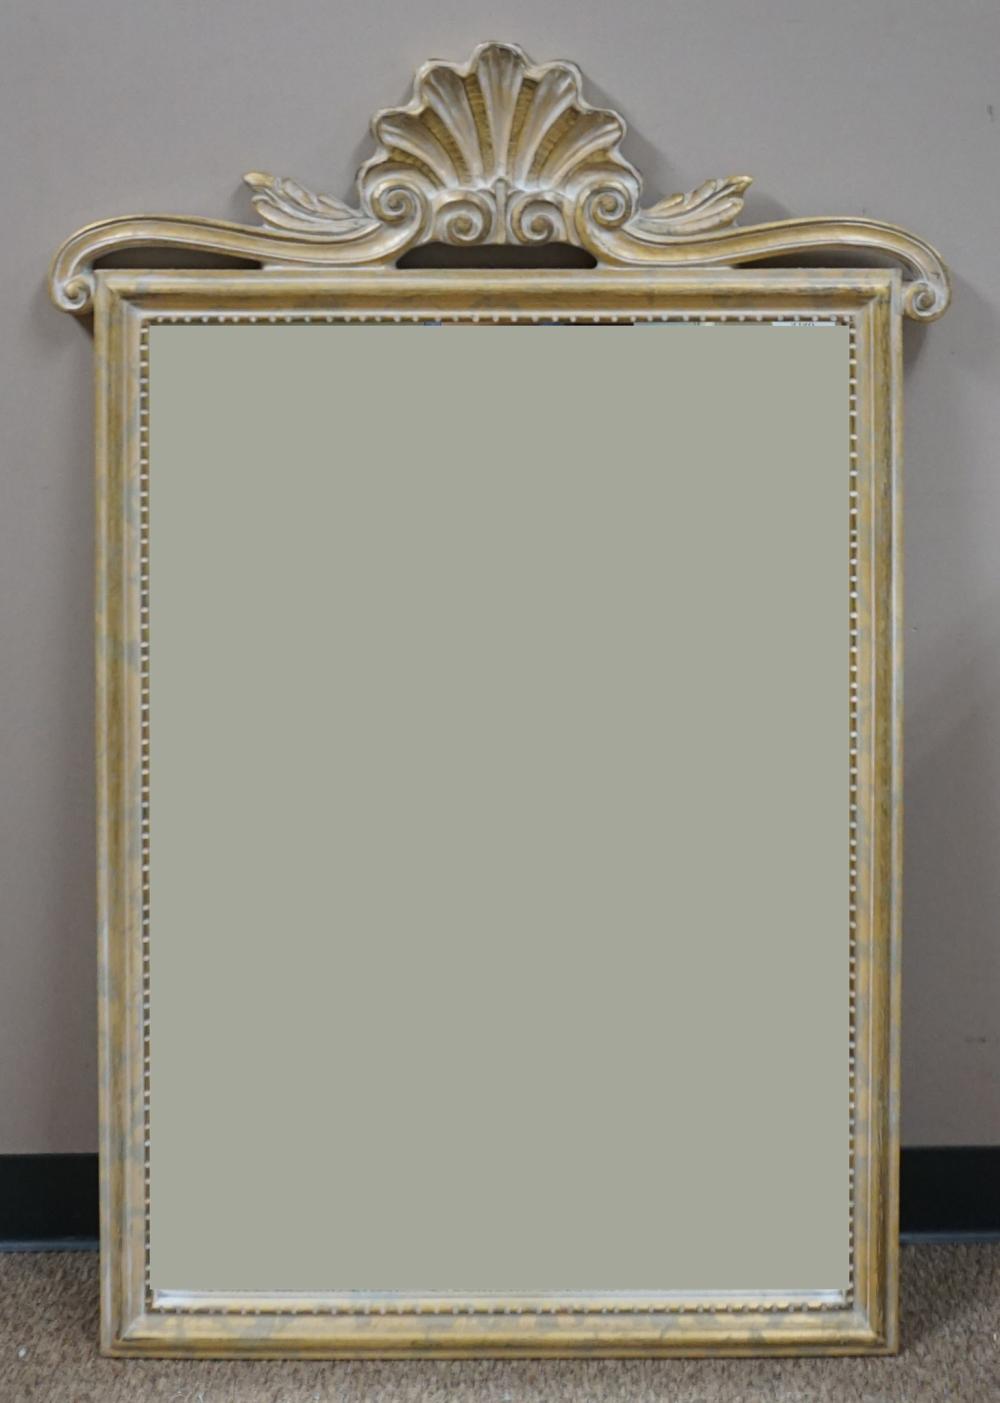 LOUIS XV STYLE DISTRESSED PAINTED